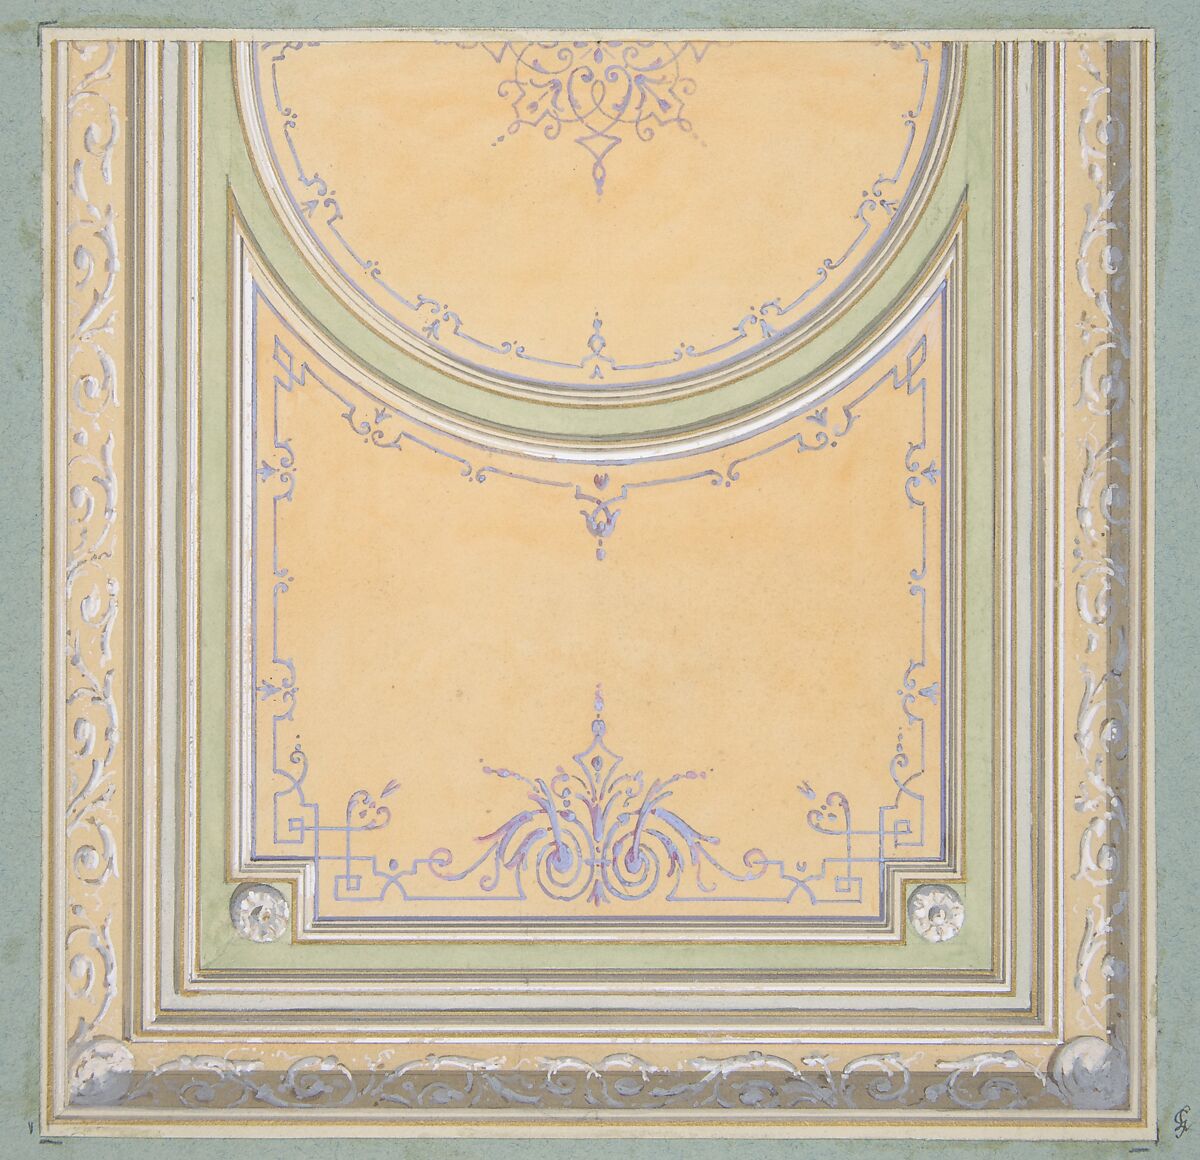 Design for the painted decoration of a ceiling, Jules-Edmond-Charles Lachaise (French, died 1897), pen and ink and watercolor on wove paper; mounted on blue wove paper 